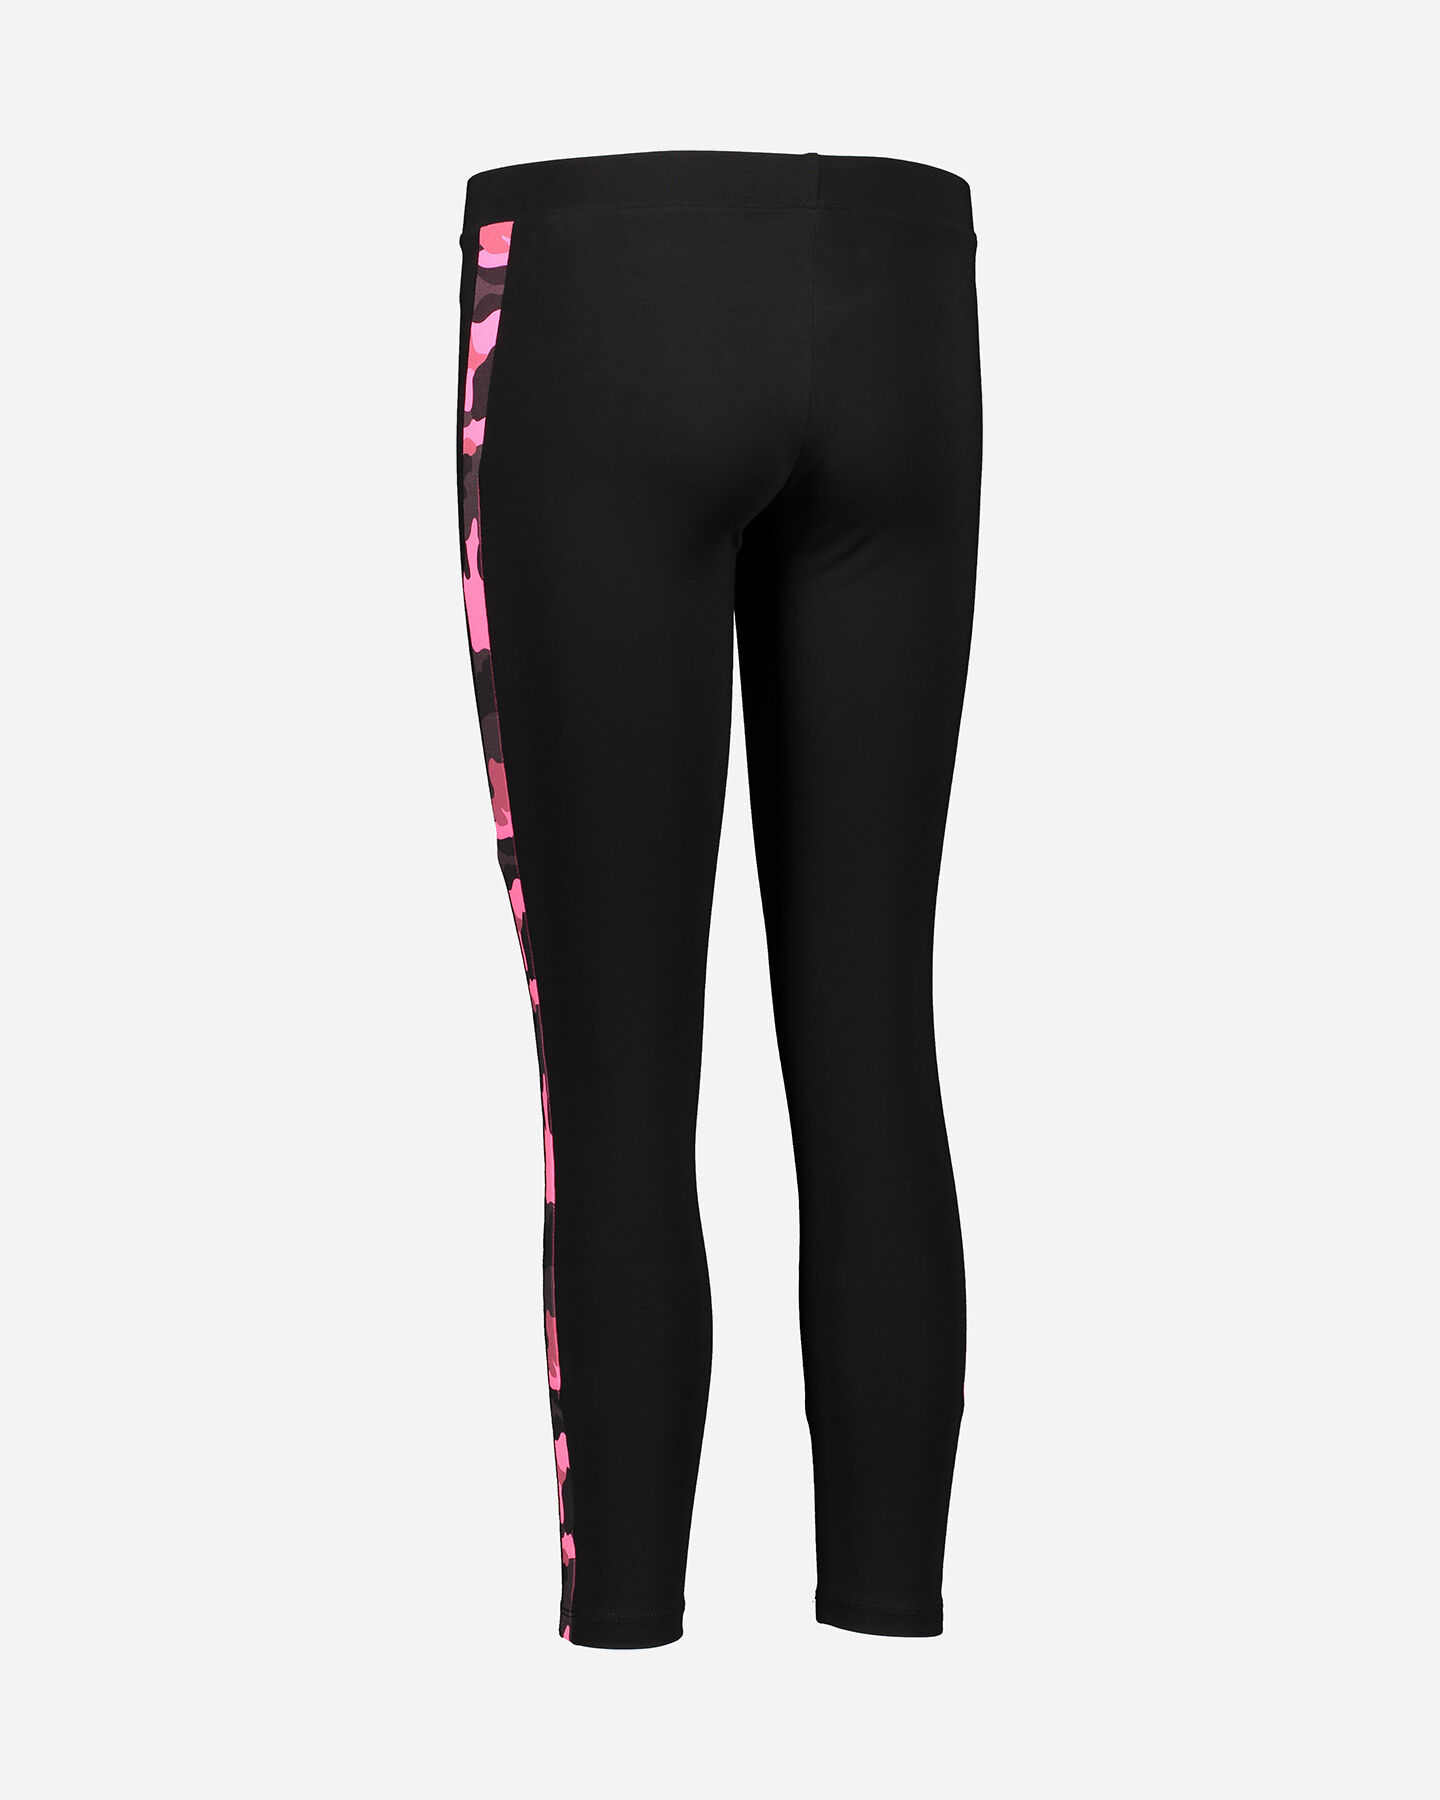  Leggings FREDDY JSTRETCH BAND LATERAL ACTIVE W S5297654|NCM9-|XS scatto 2